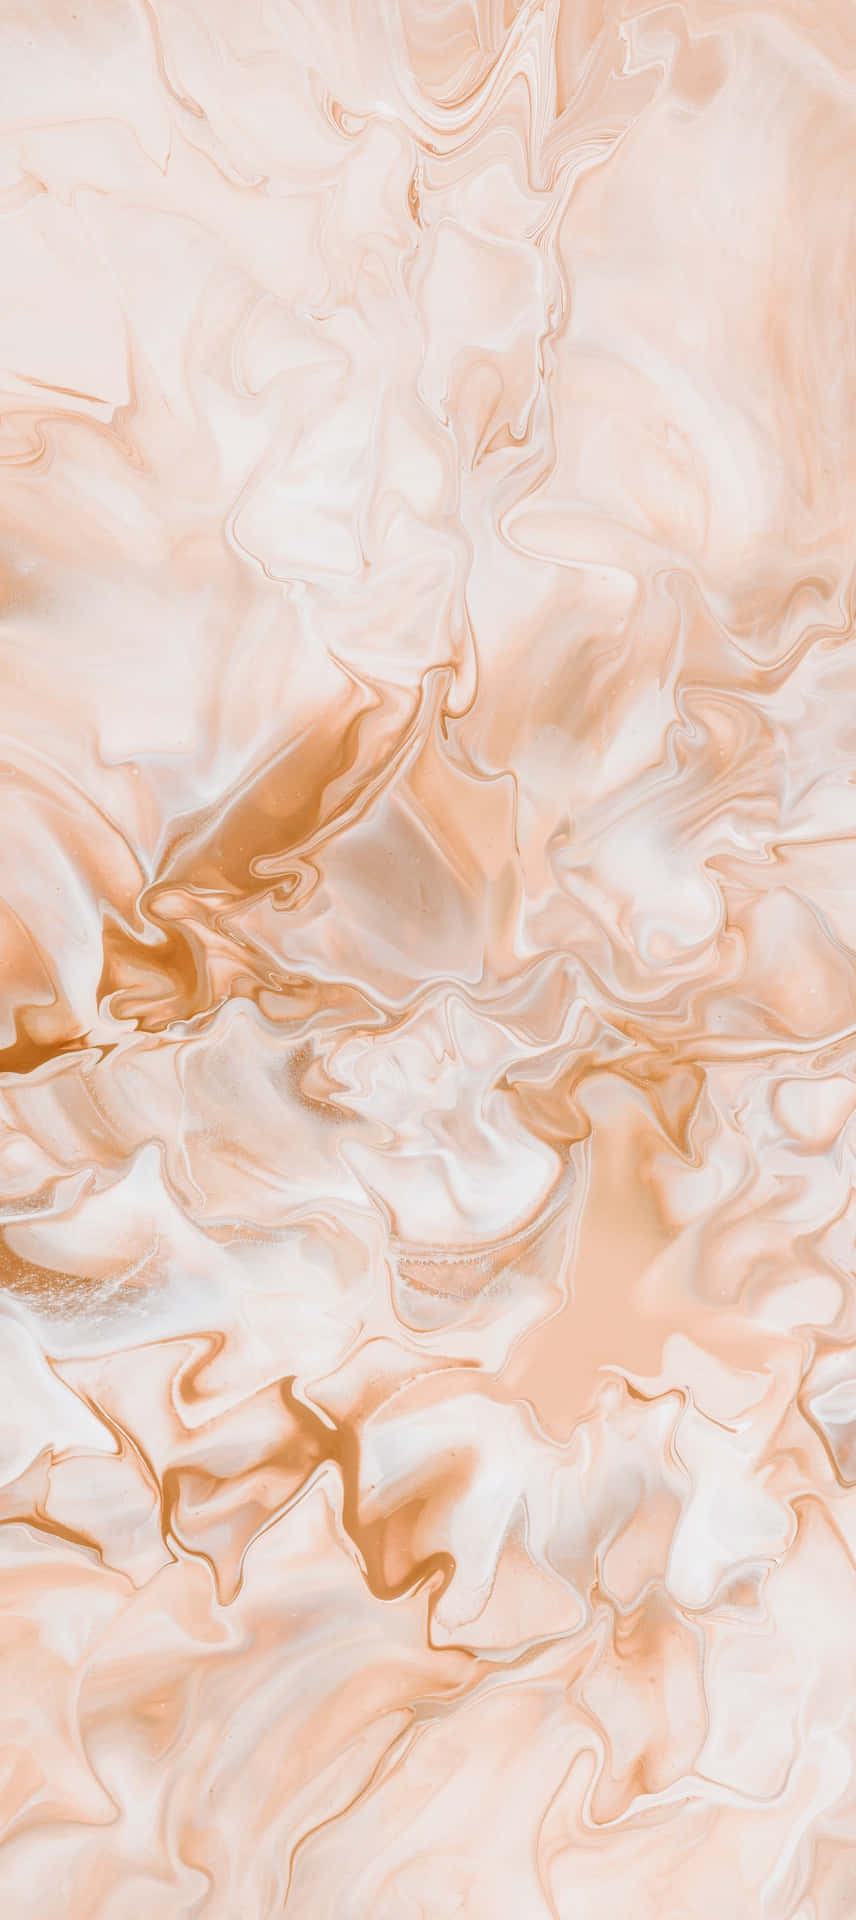 iPhone X Rustic Marble Background